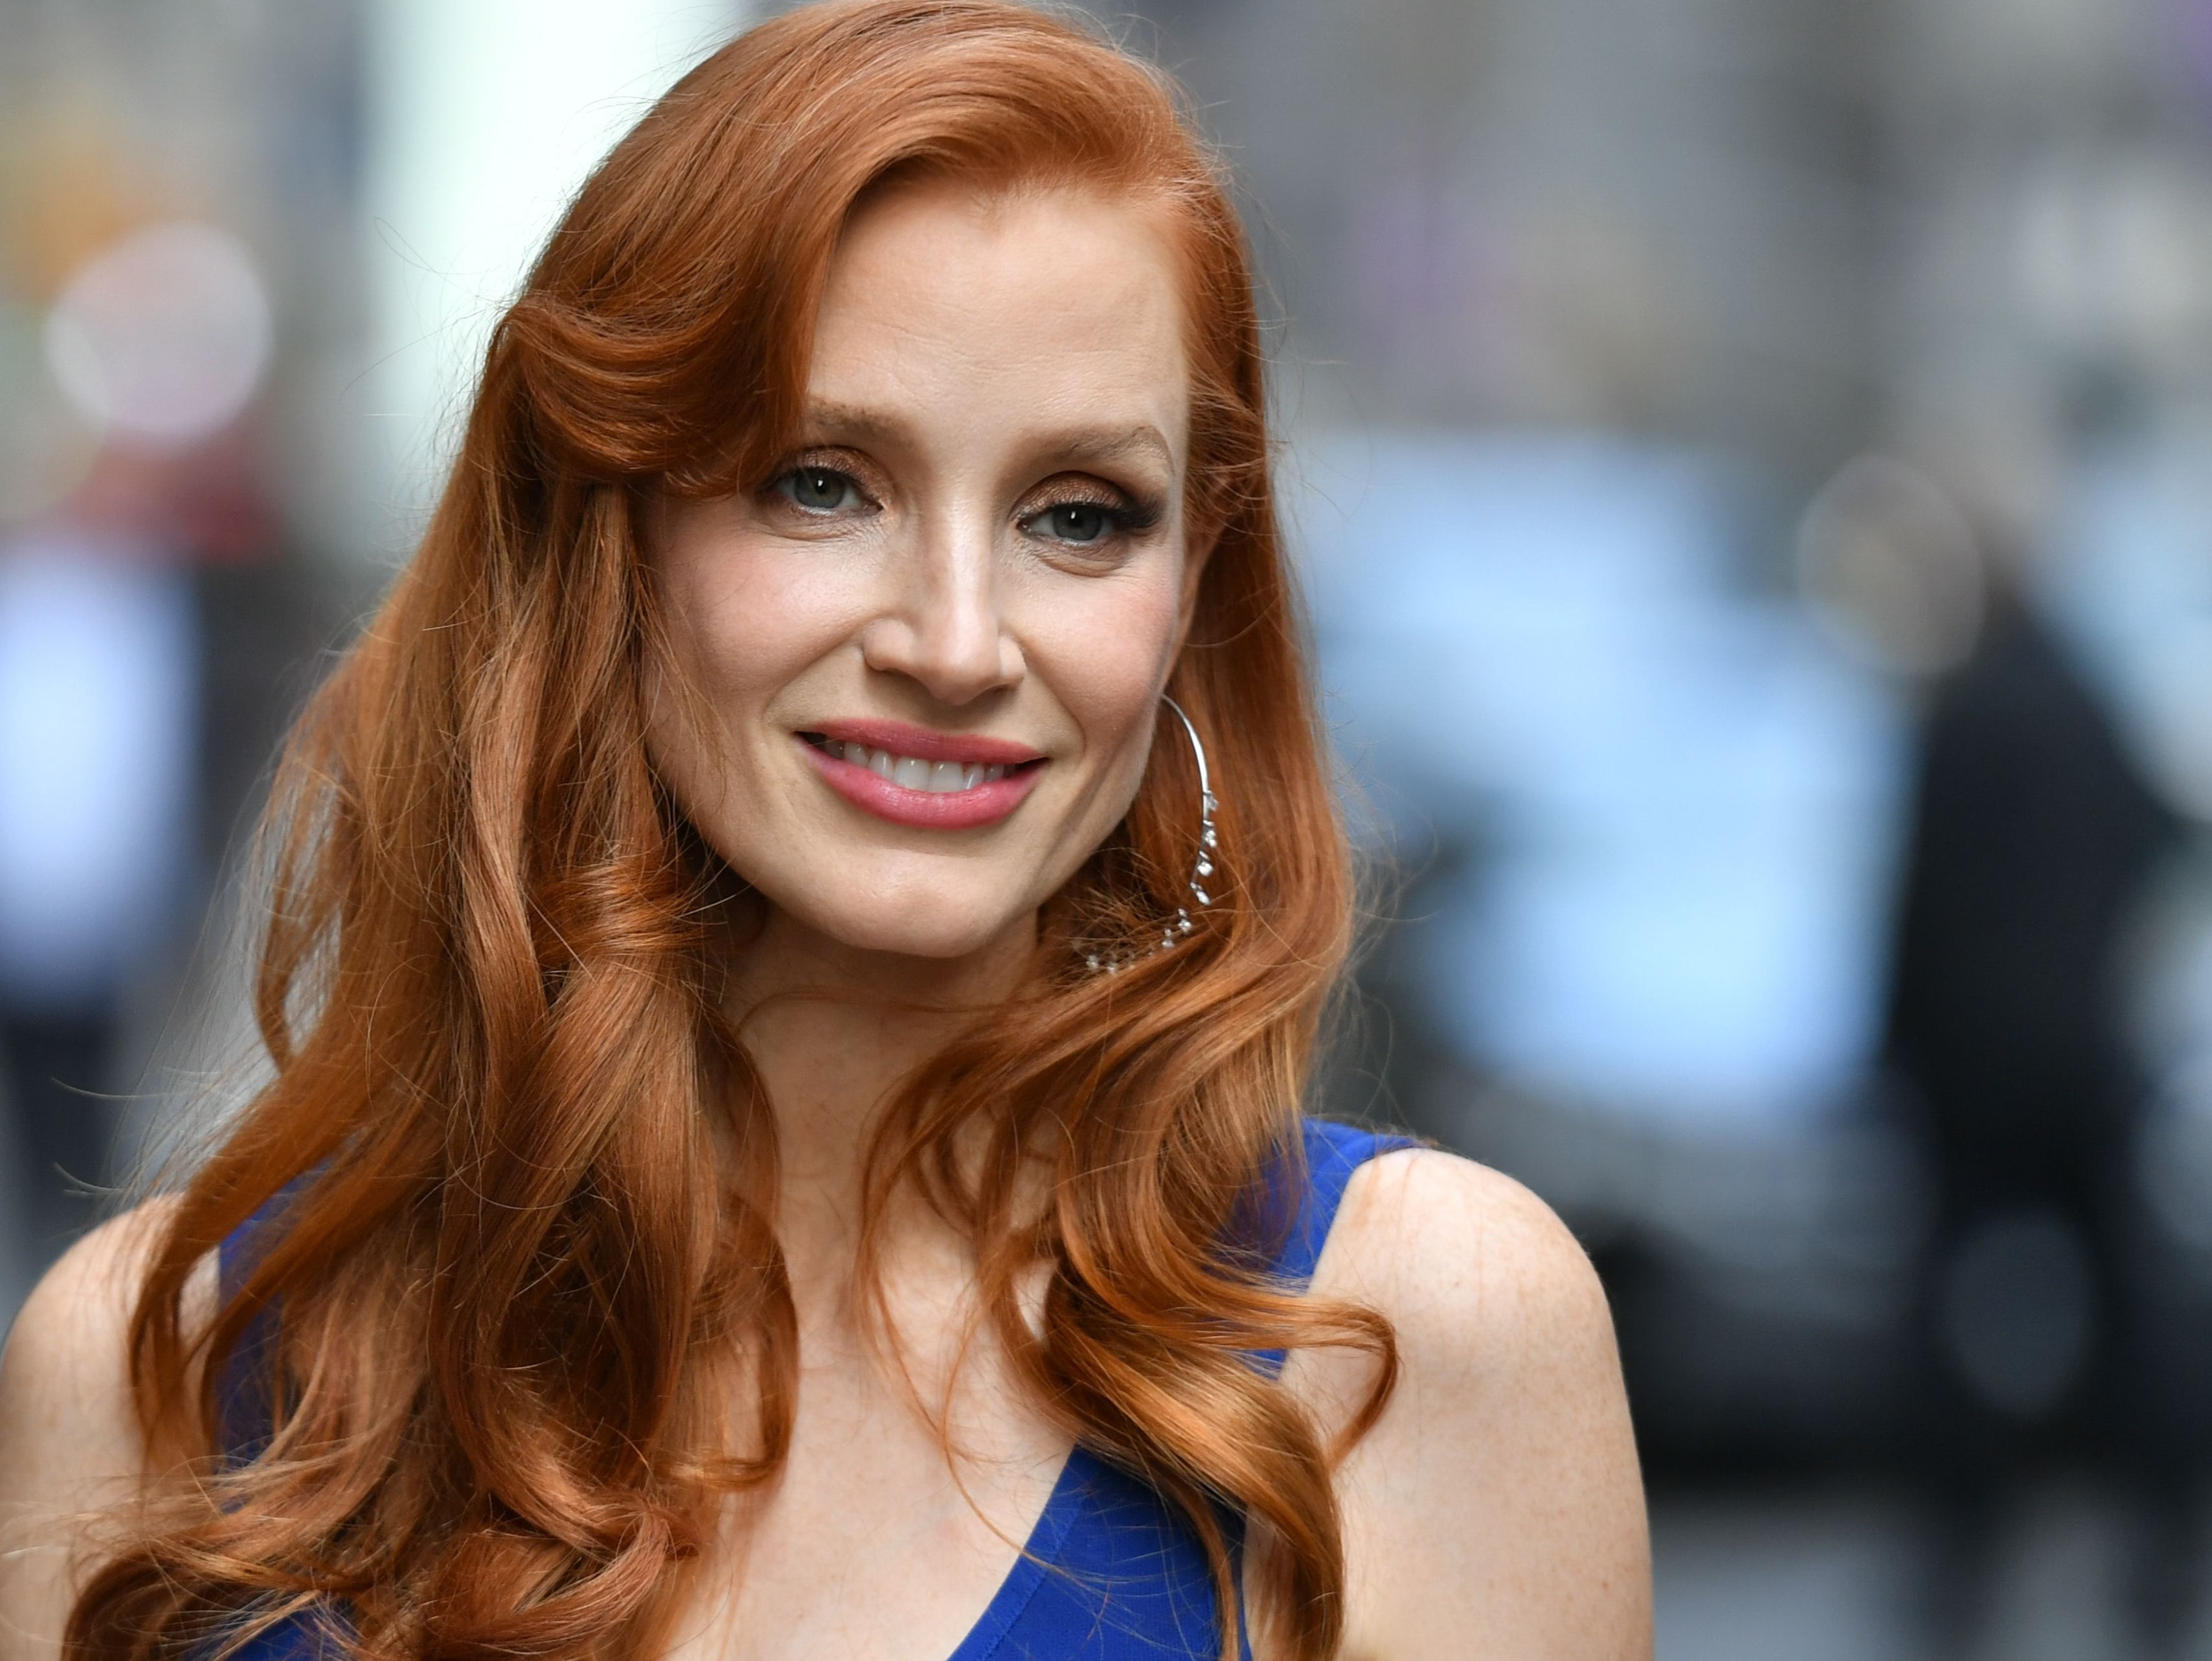 In many of Chastain’s best roles, the star’s characters have a steely determination that she clearly shares